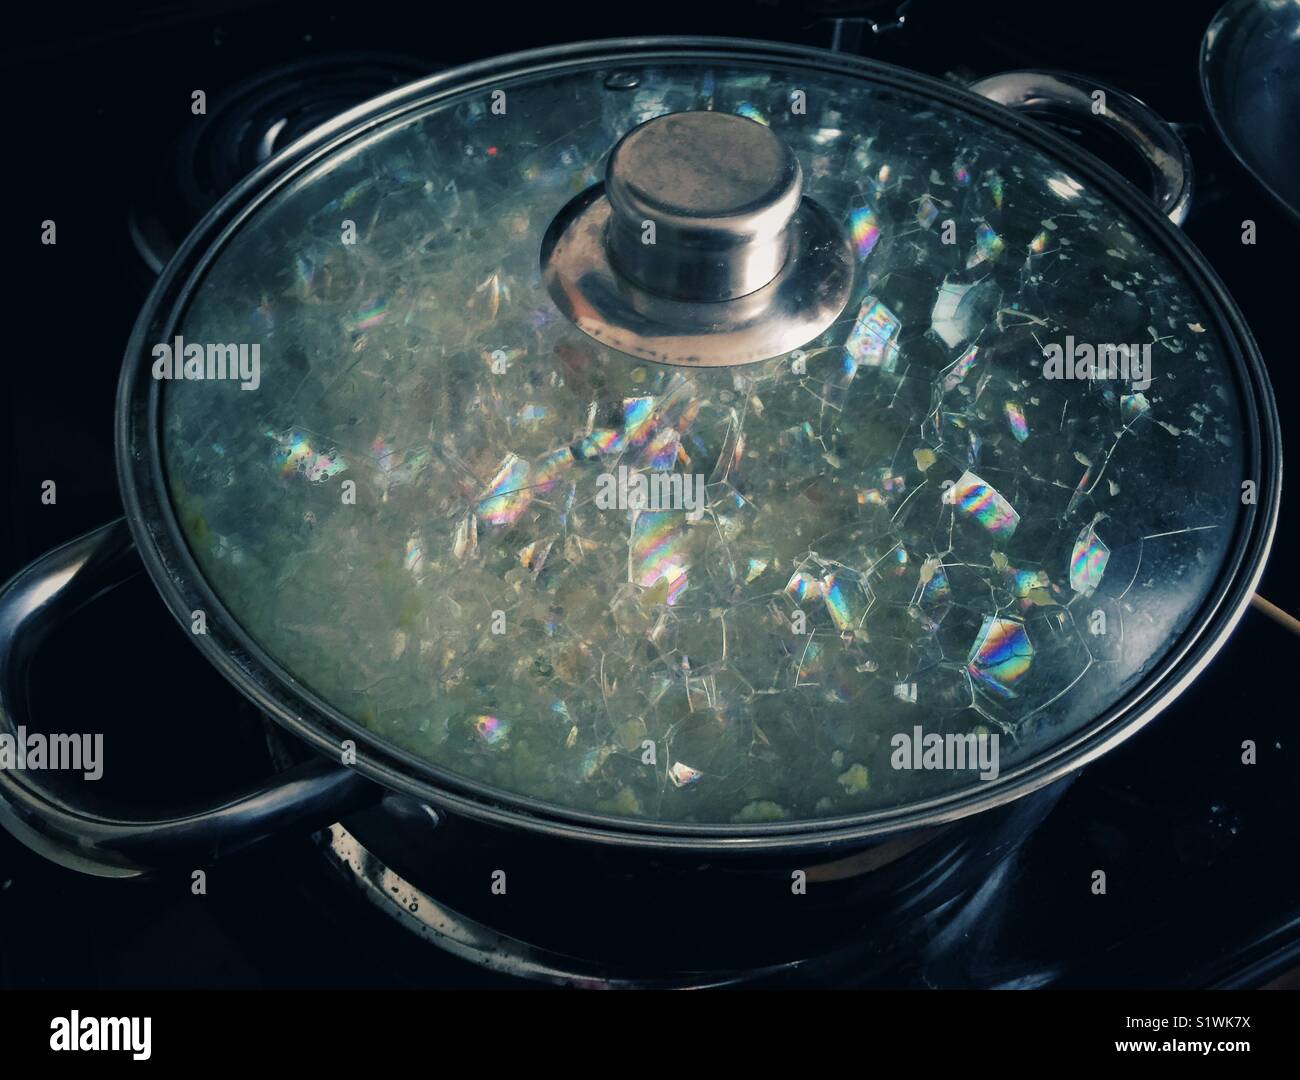 https://c8.alamy.com/comp/S1WK7X/rainbow-bubbles-inside-the-pot-with-boiling-water-on-the-stove-S1WK7X.jpg